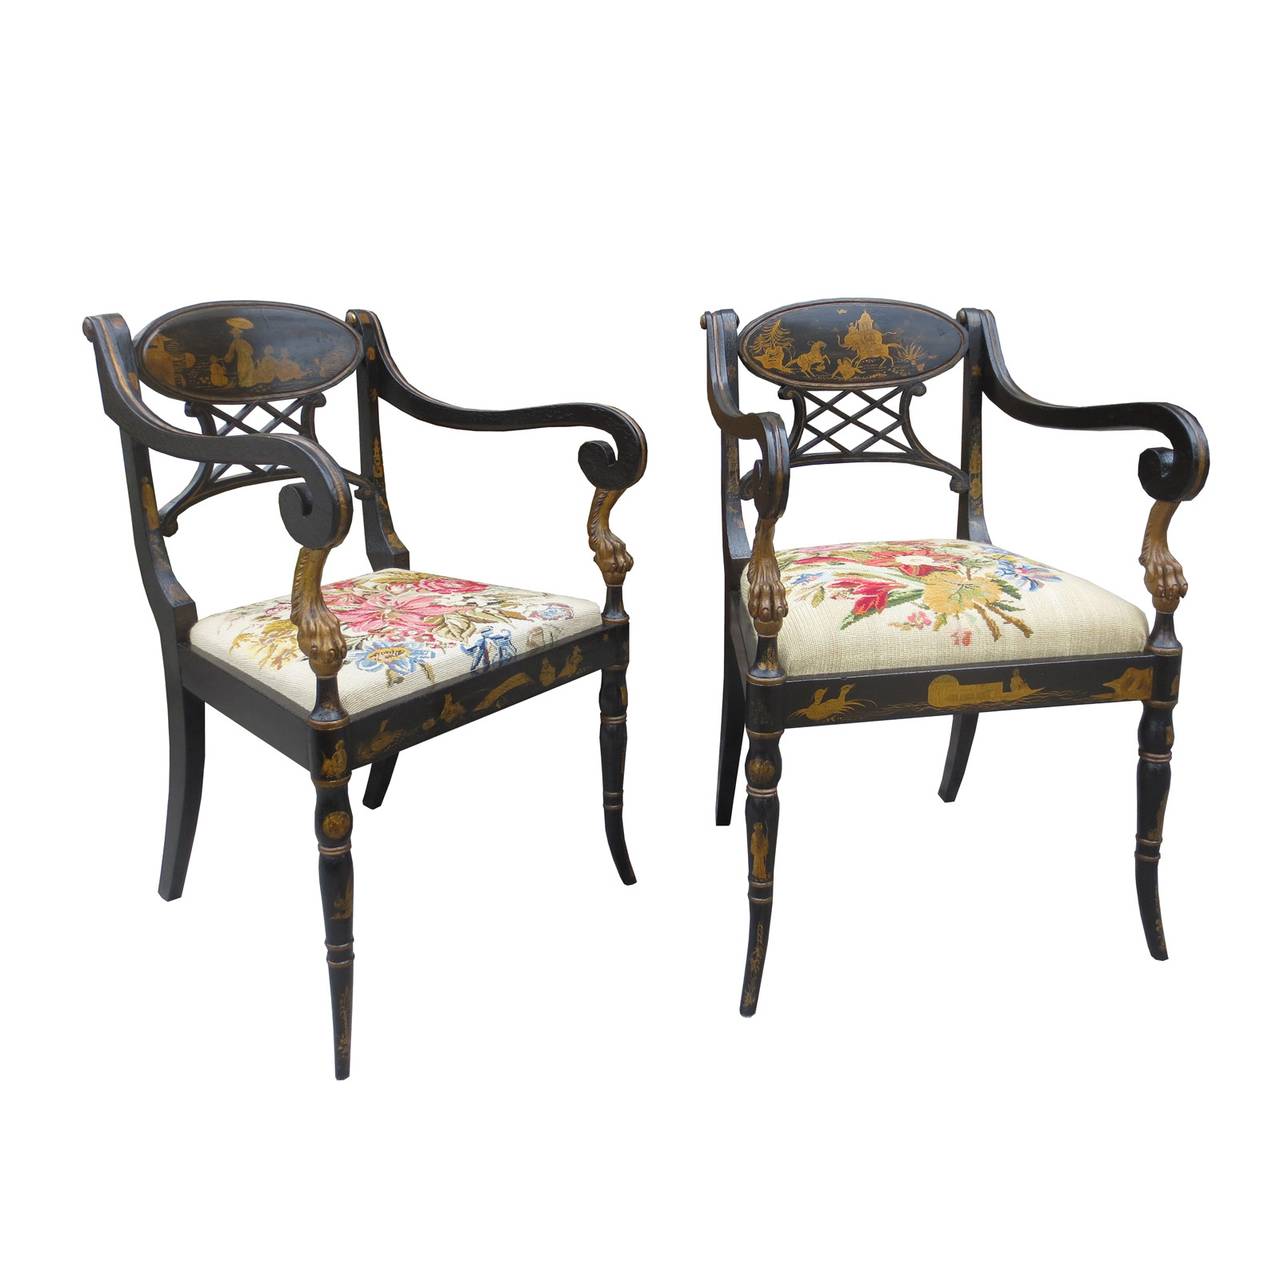 Pair of 19th century Regency chairs, estate of Bunny Mellon.